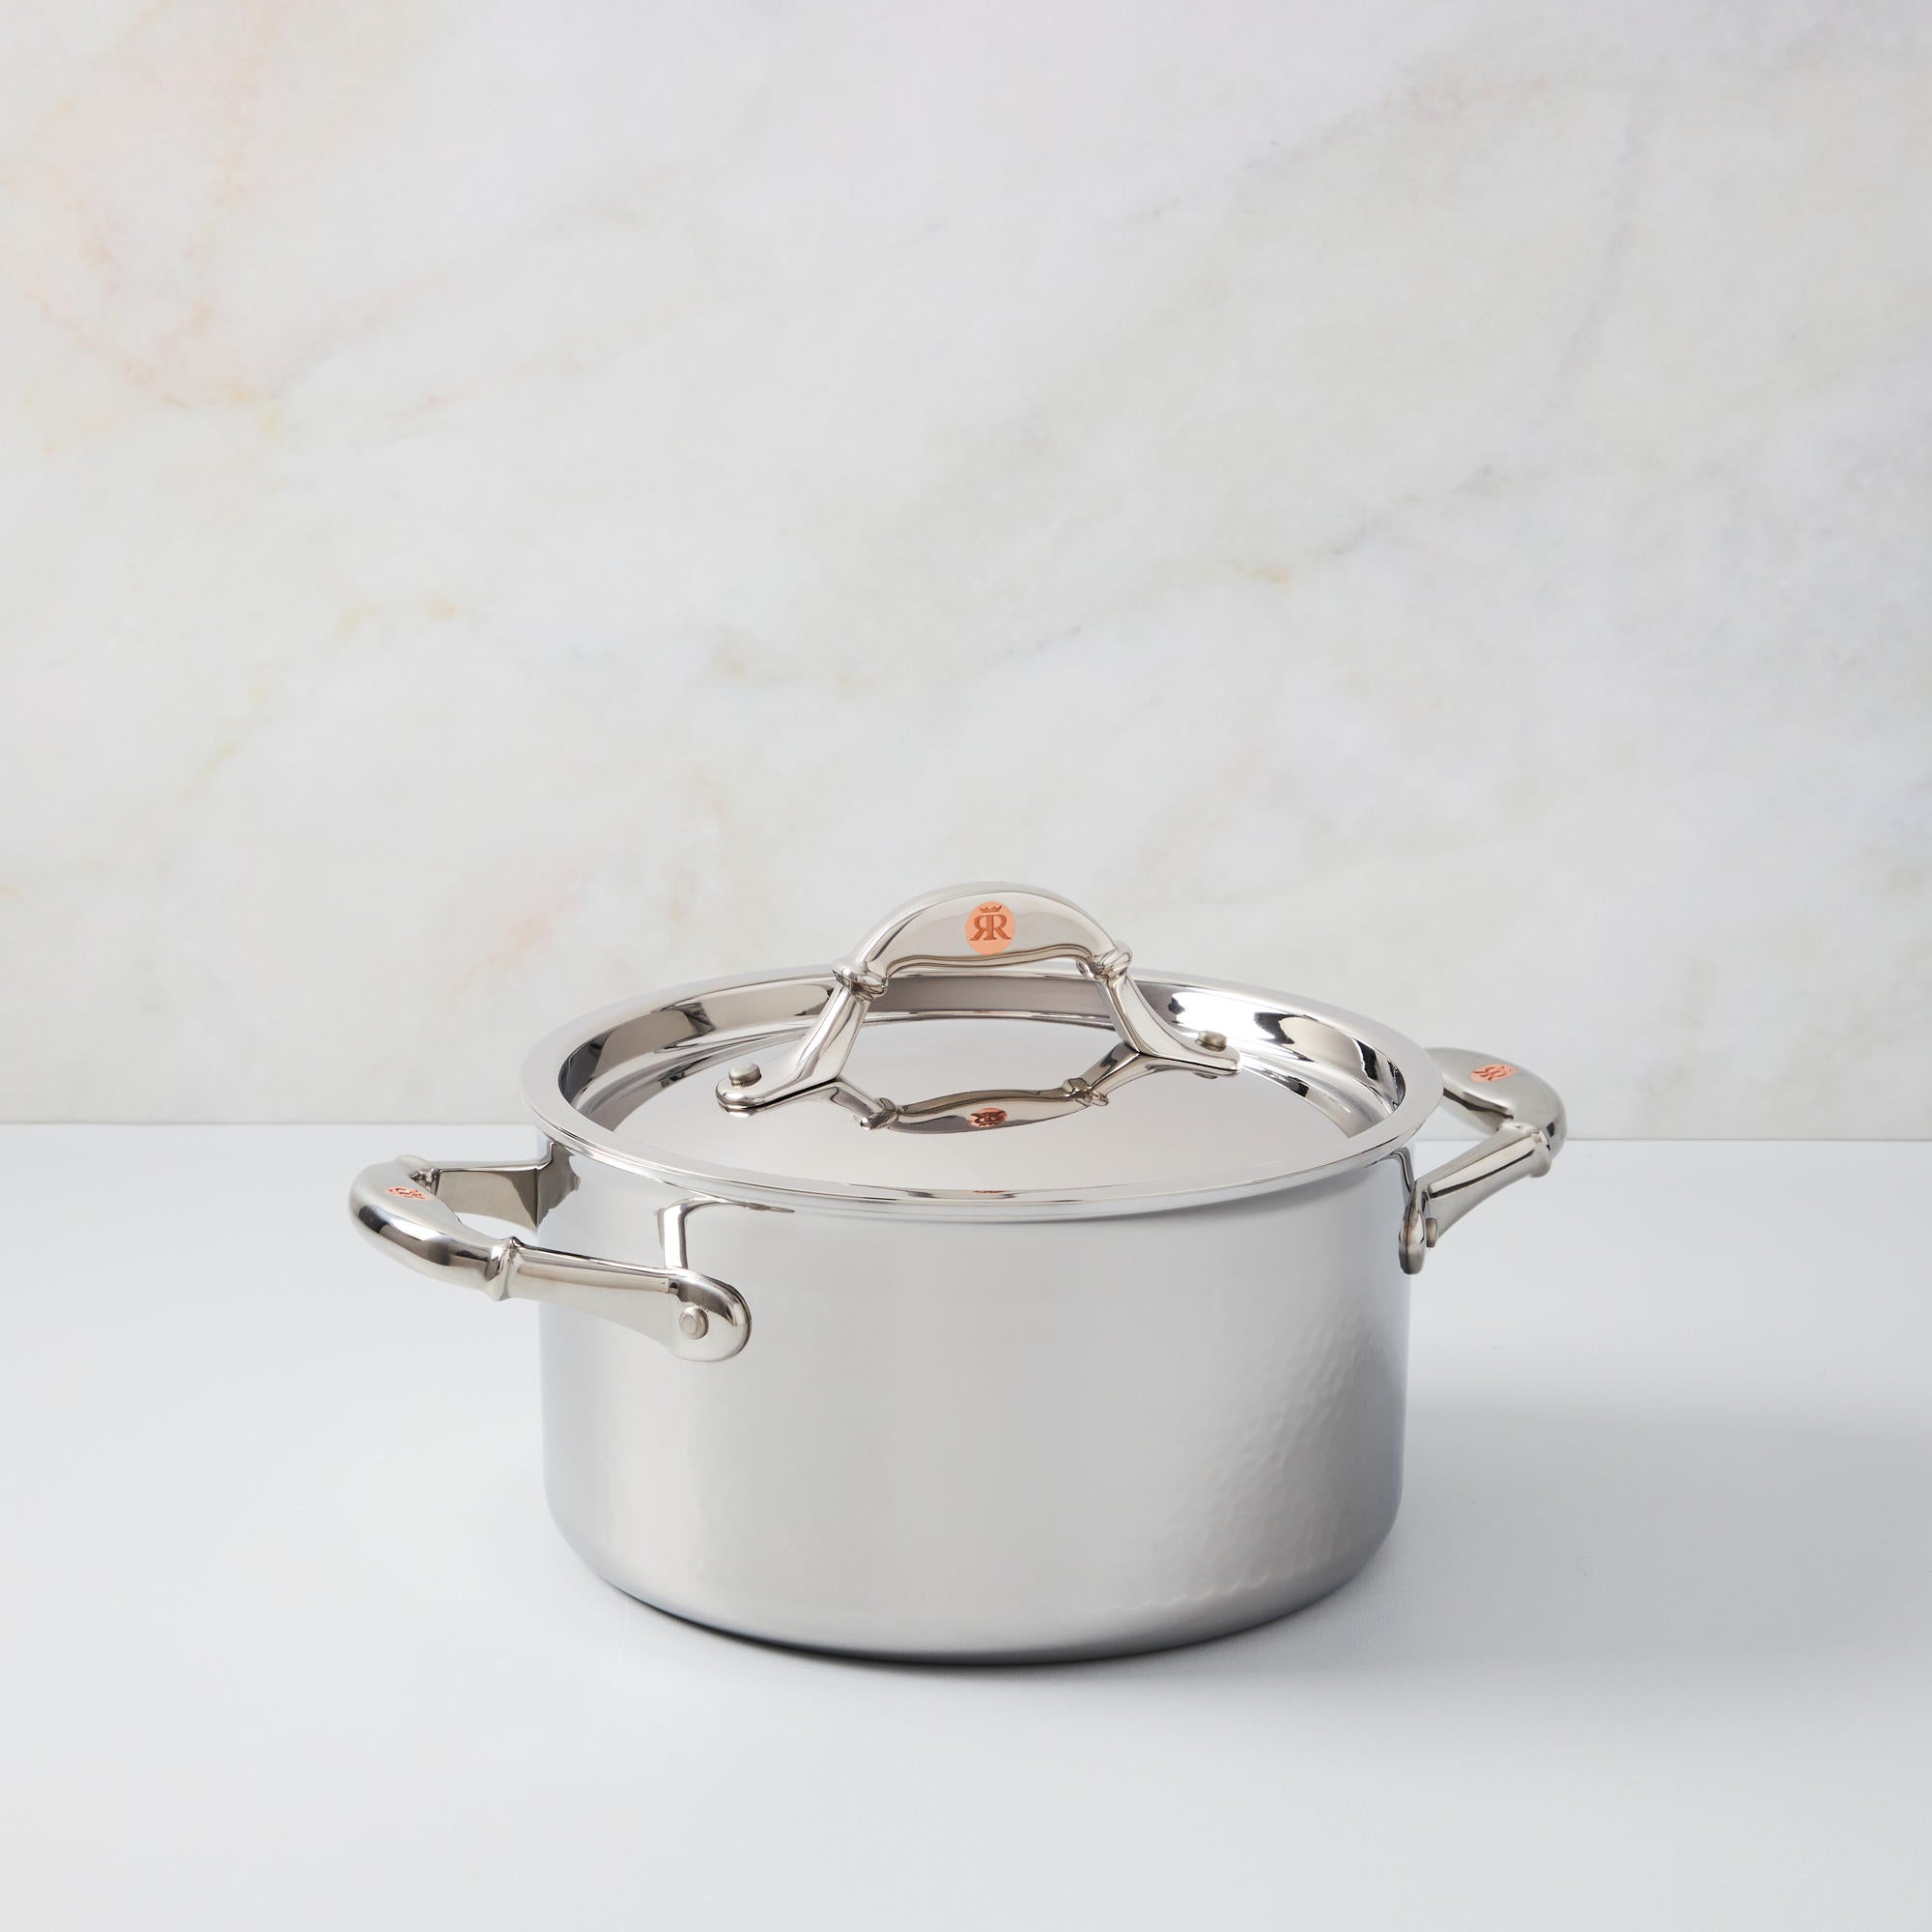 Ruffoni Symphonia Prima Soup Pot, hand hammered clad stainless steel ...